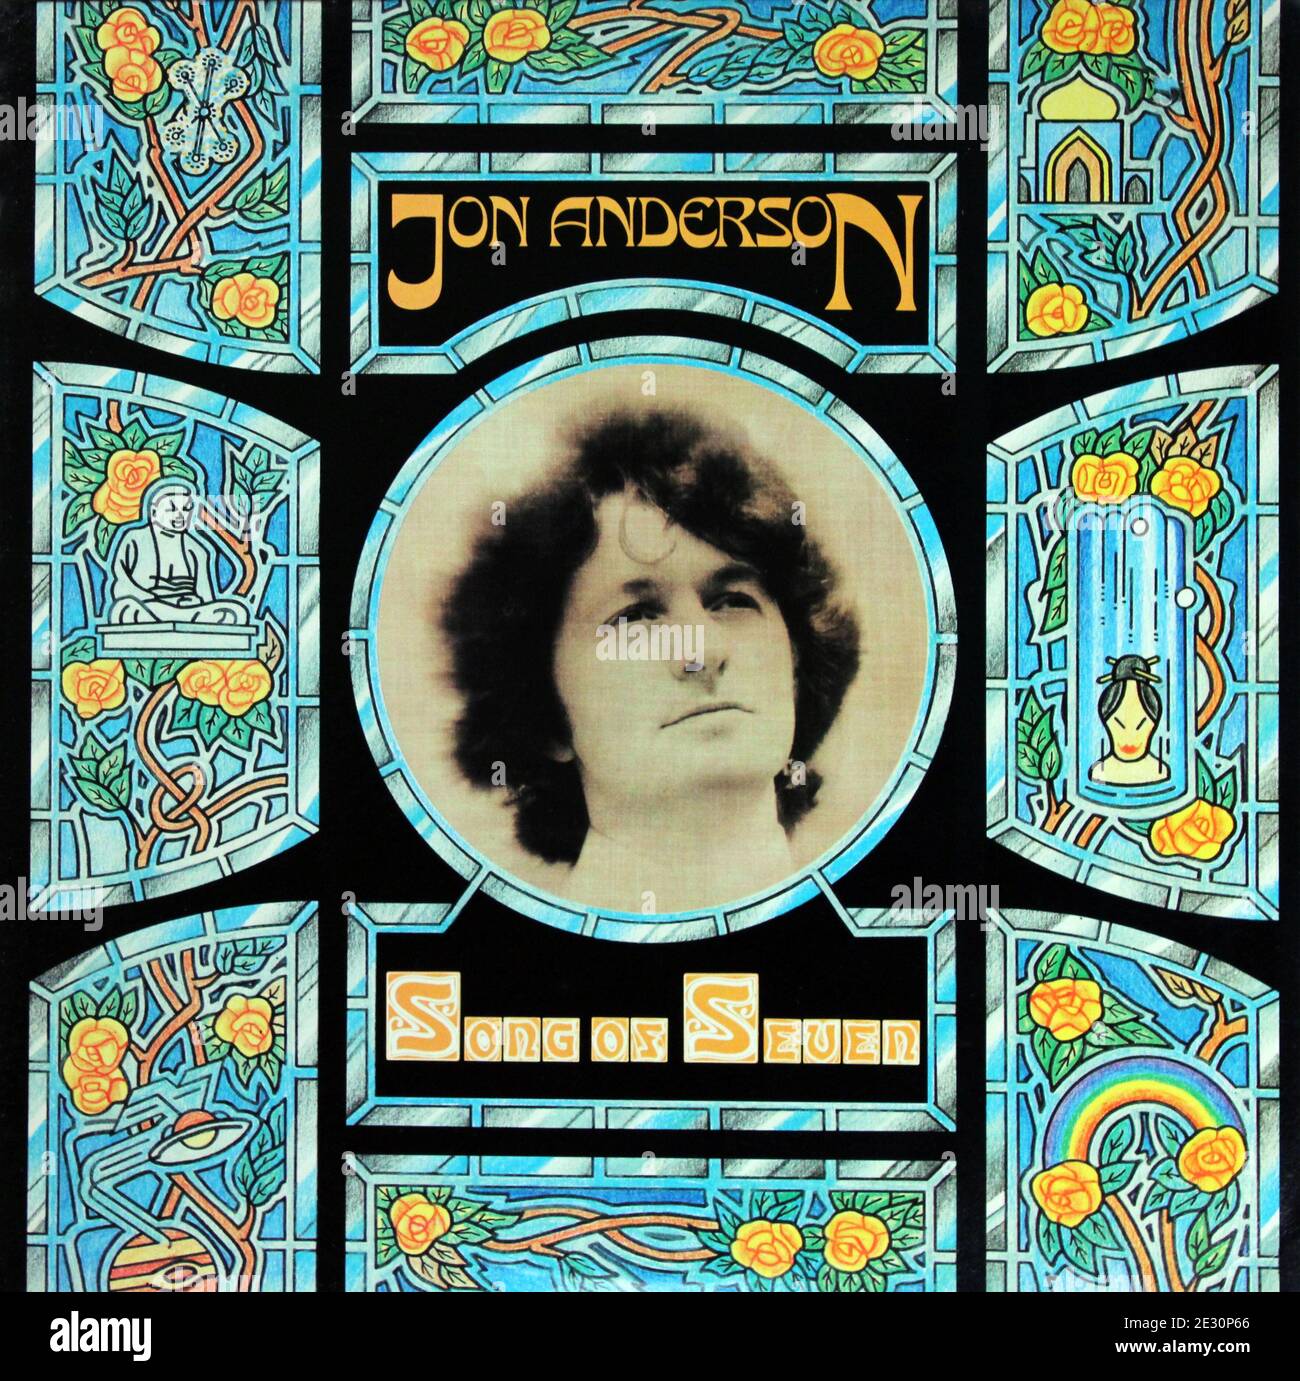 Jon Anderson: 1980. LP front cover: Song Of Seven Stock Photo